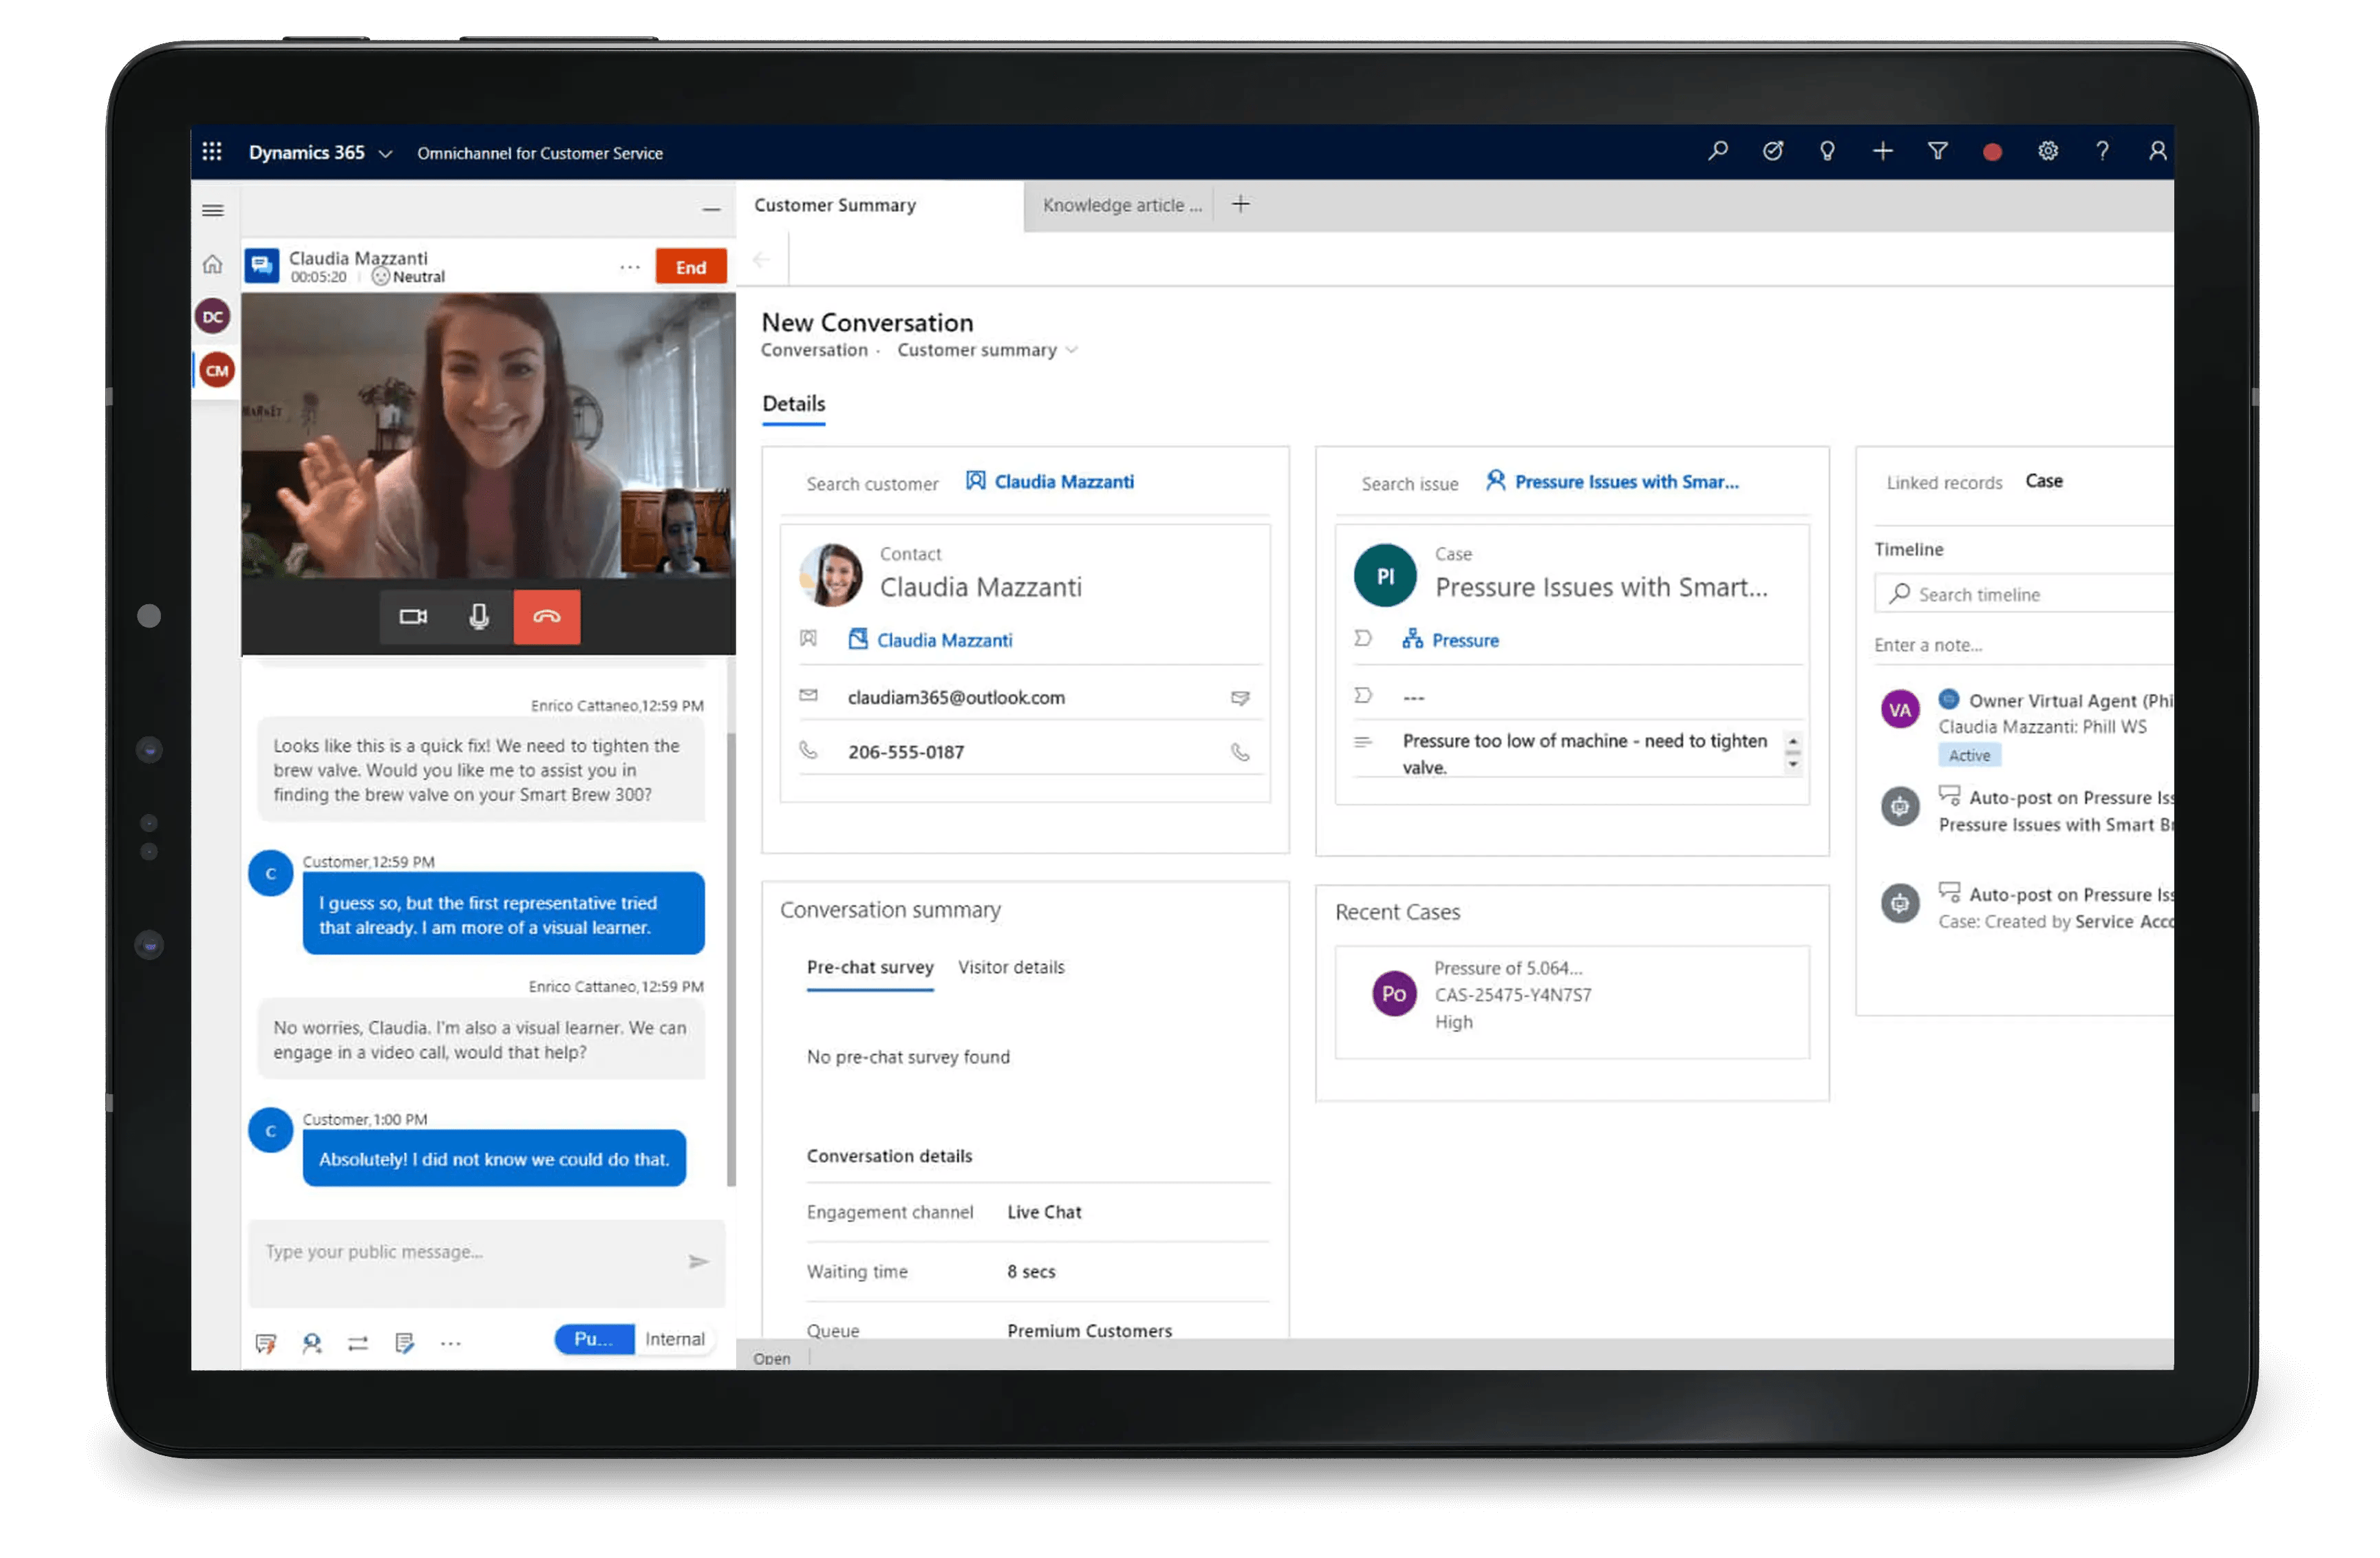 Dynamics 365 Customer Service allows you to interact with customers